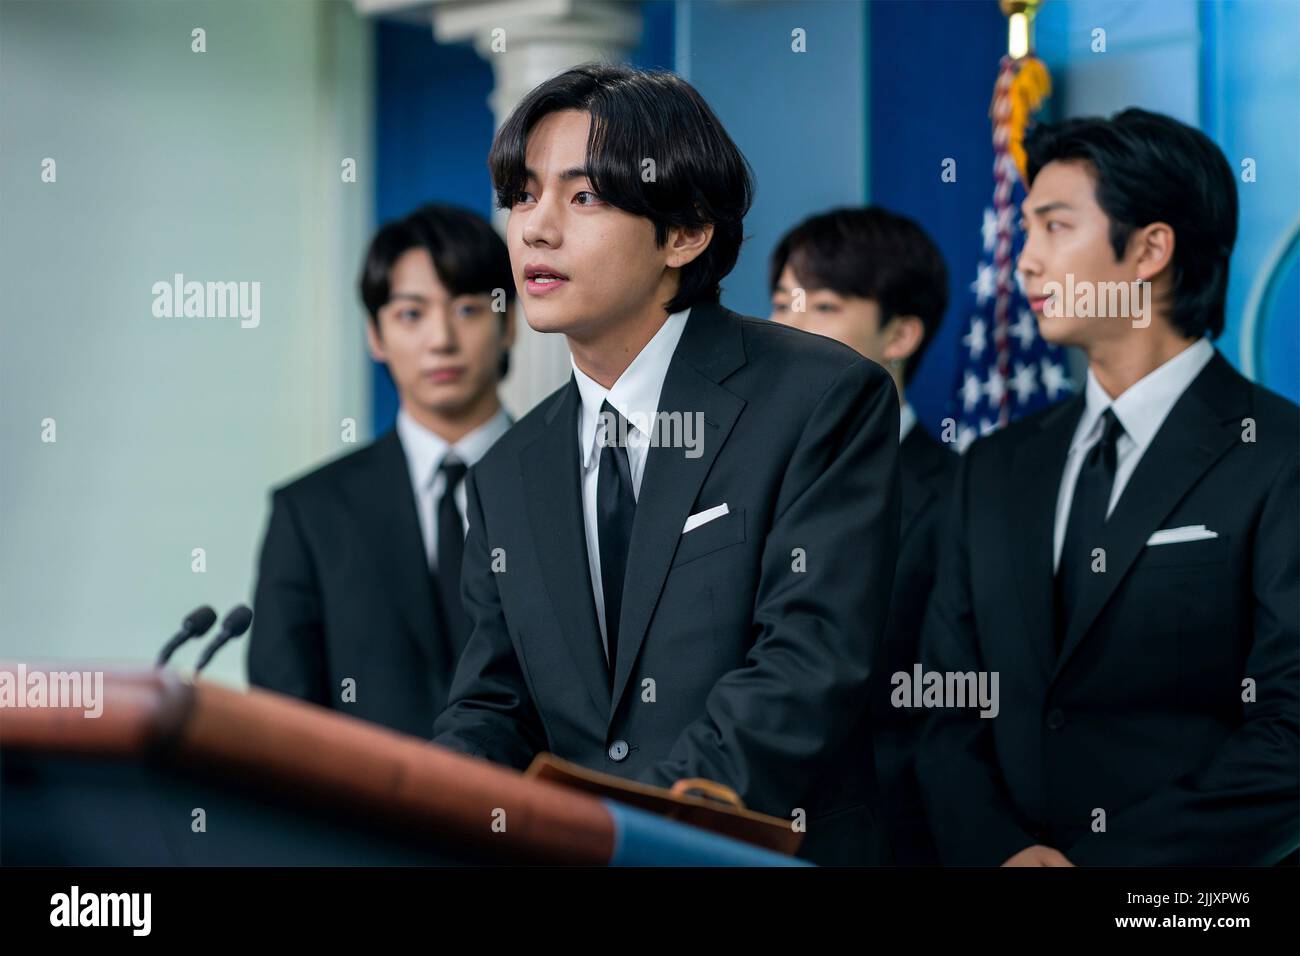 Washington, United States of America. 31 May, 2022. K-Pop band BTS member Kim Tae-hyung, known as V, joins White House Press Secretary Karine Jean-Pierre in the James S. Brady Press Briefing Room of the White House, May 31, 2022, in Washington, D.C. Credit: Erin Scott/White House Photo/Alamy Live News Stock Photo